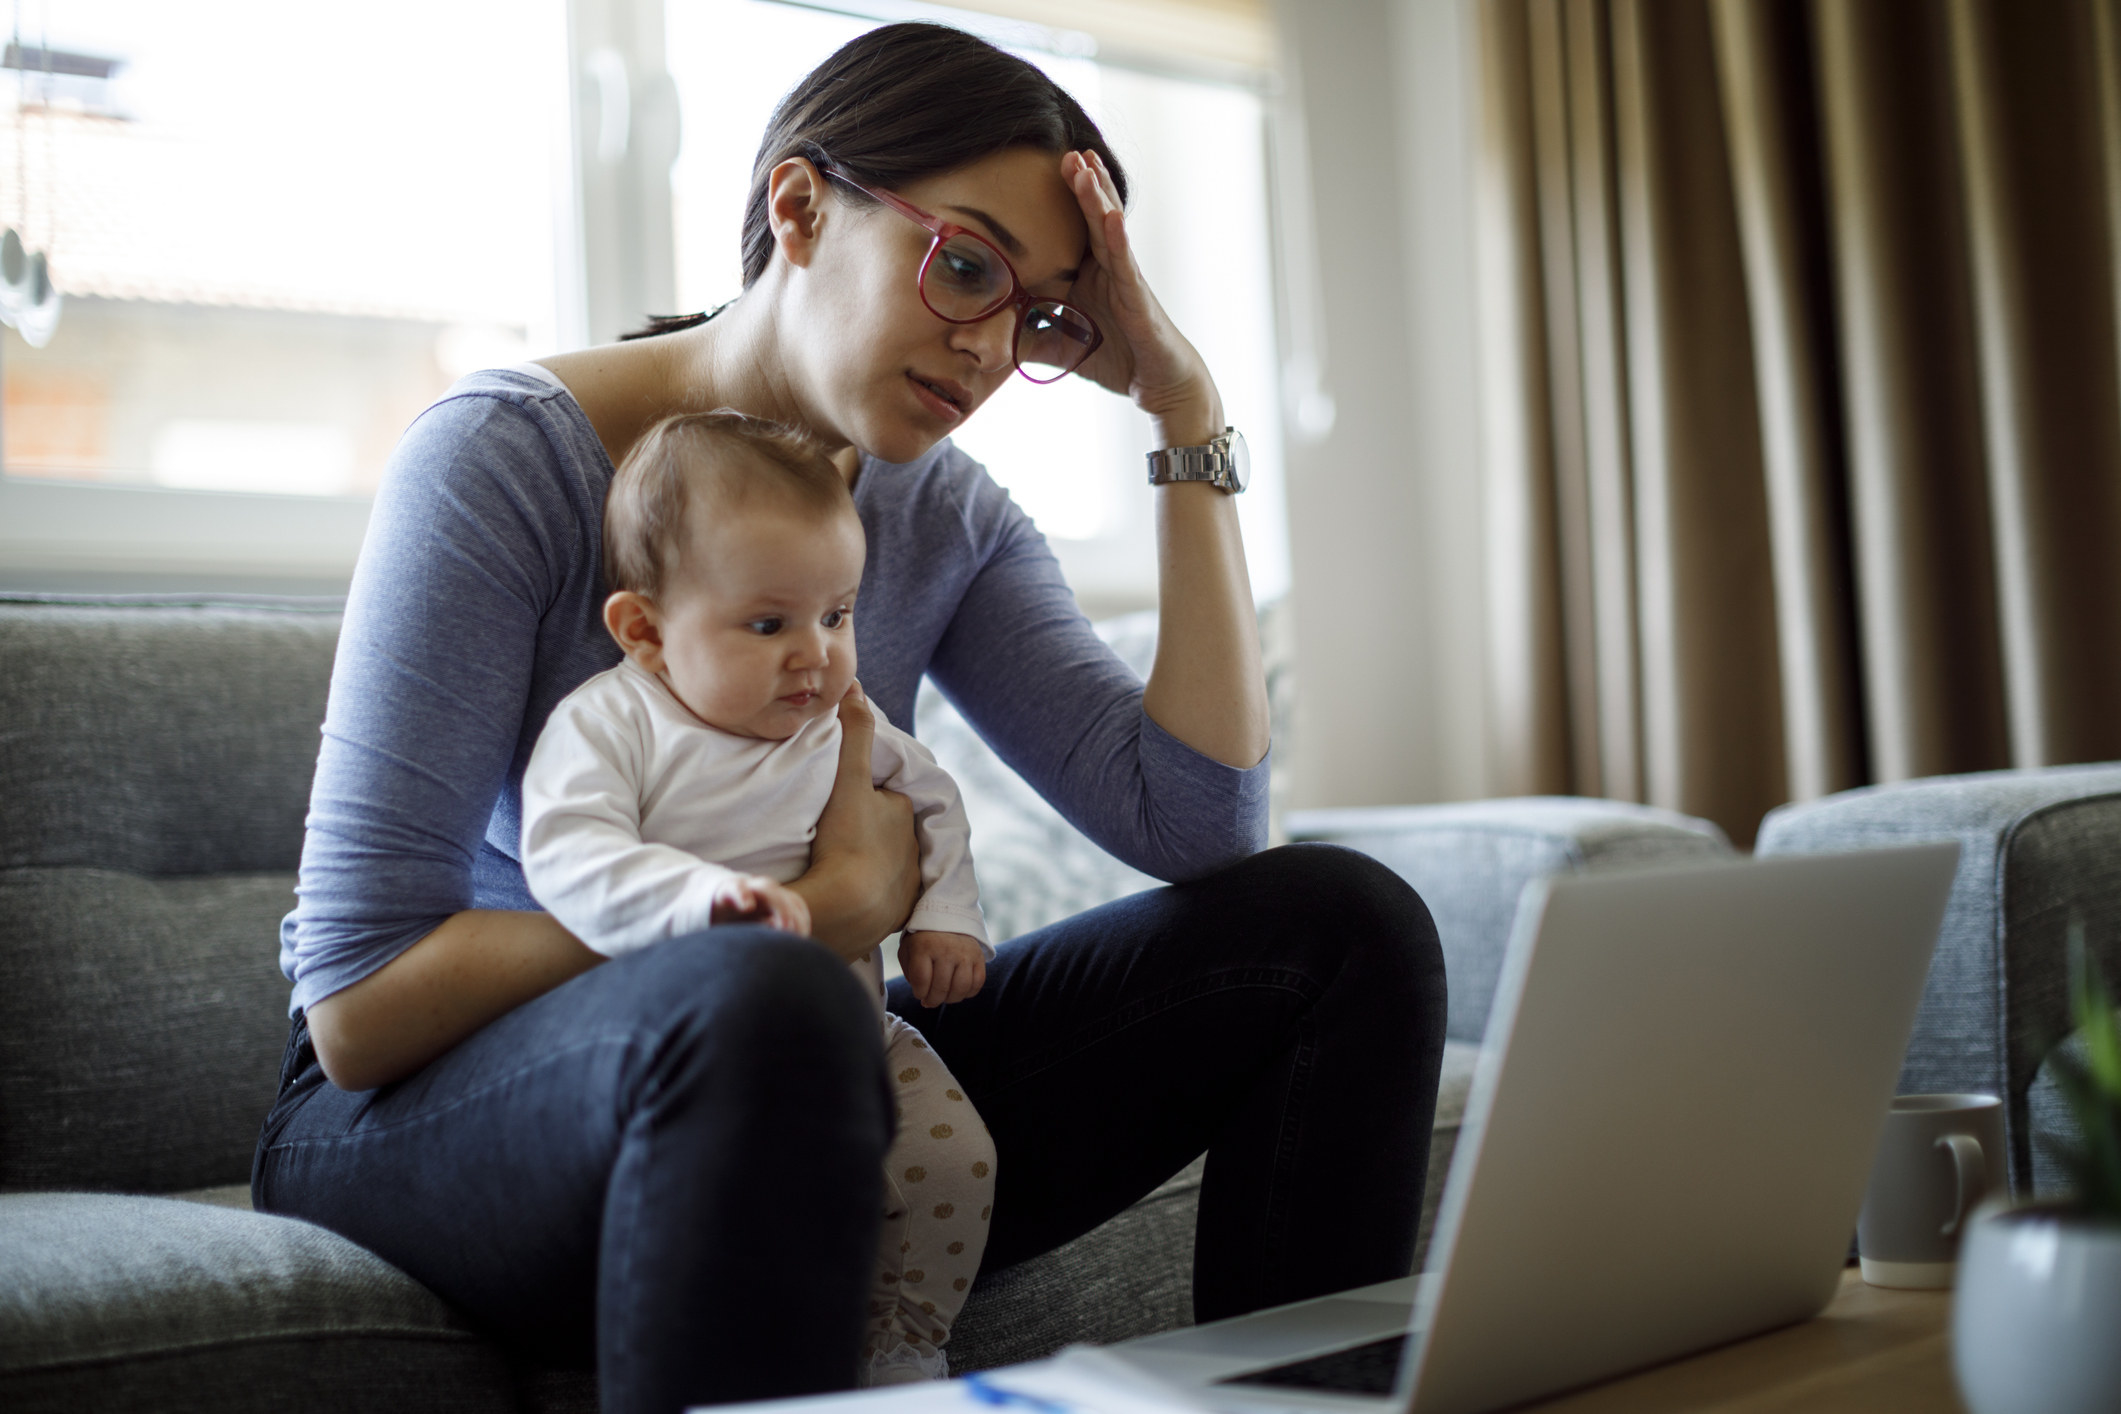 A woman looks tired as she holds a baby and works on her computer